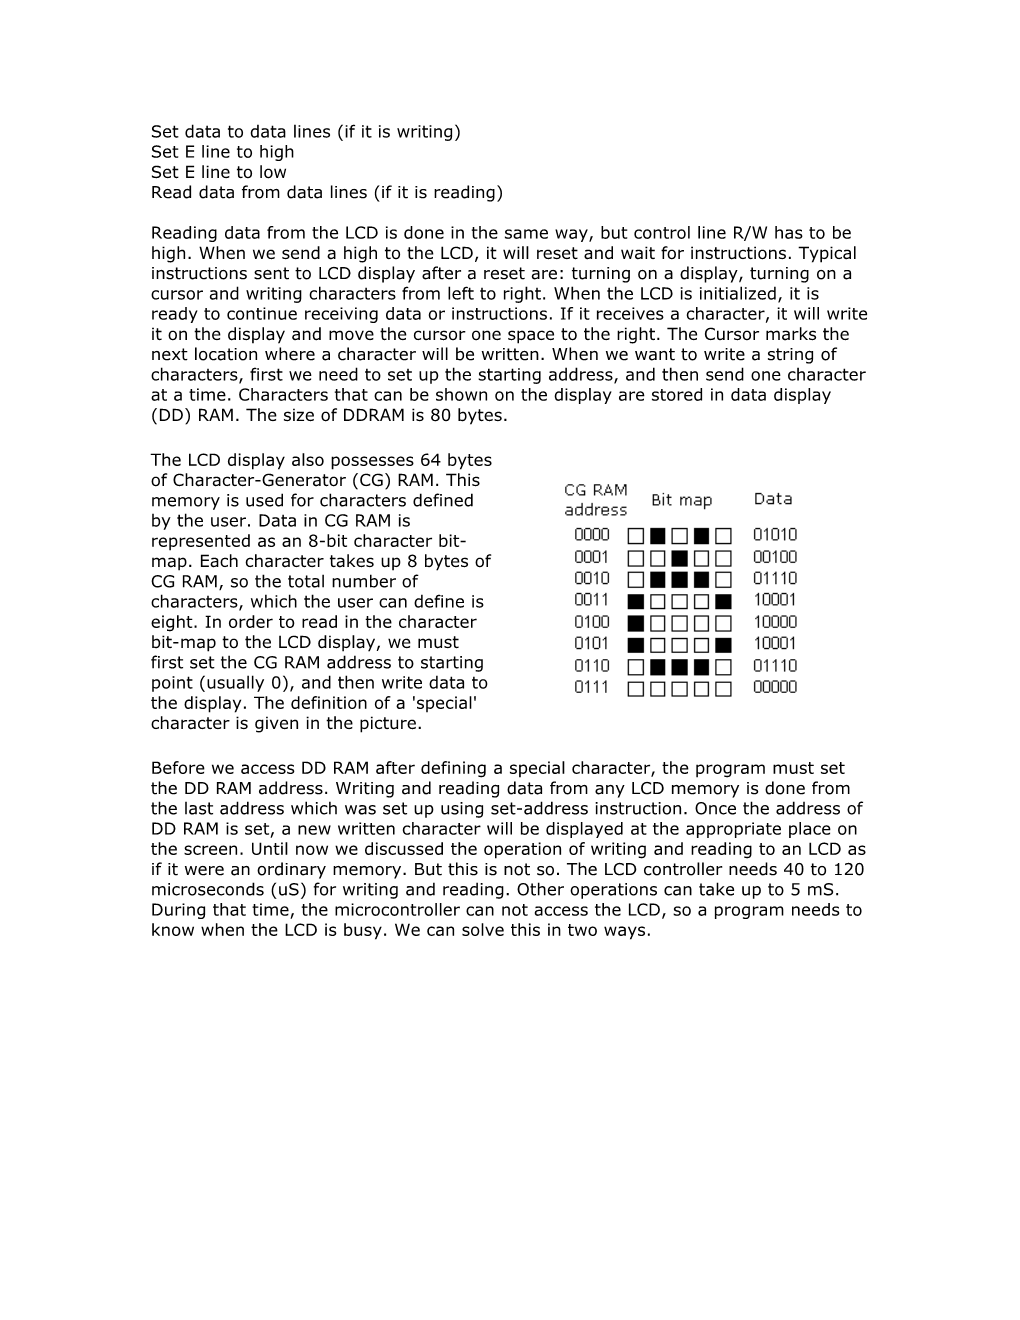 This Document Is Extracted from the Book PIC Microcontrollers for Beginner by Nebojsa Matic